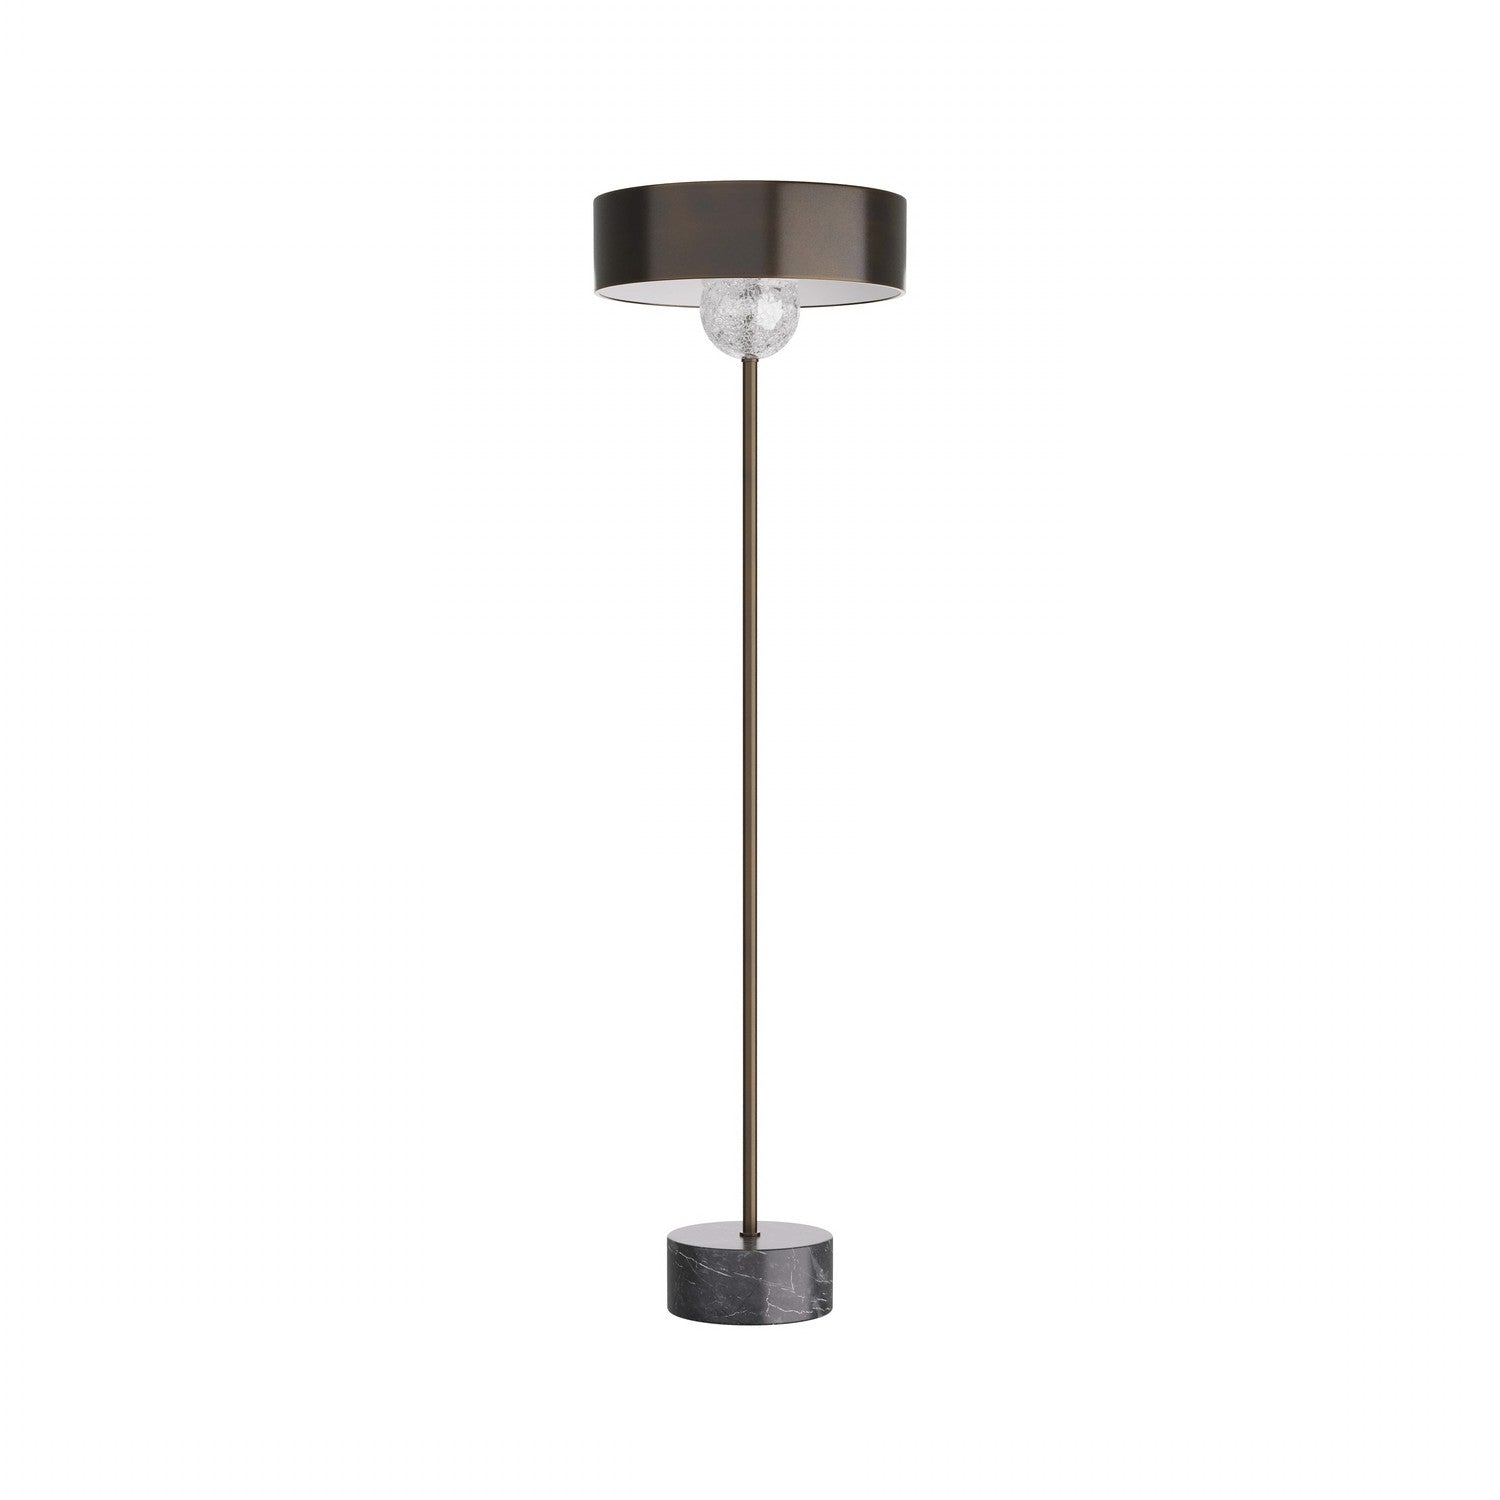 LED Floor Lamp from the Wheeler collection in English Bronze finish